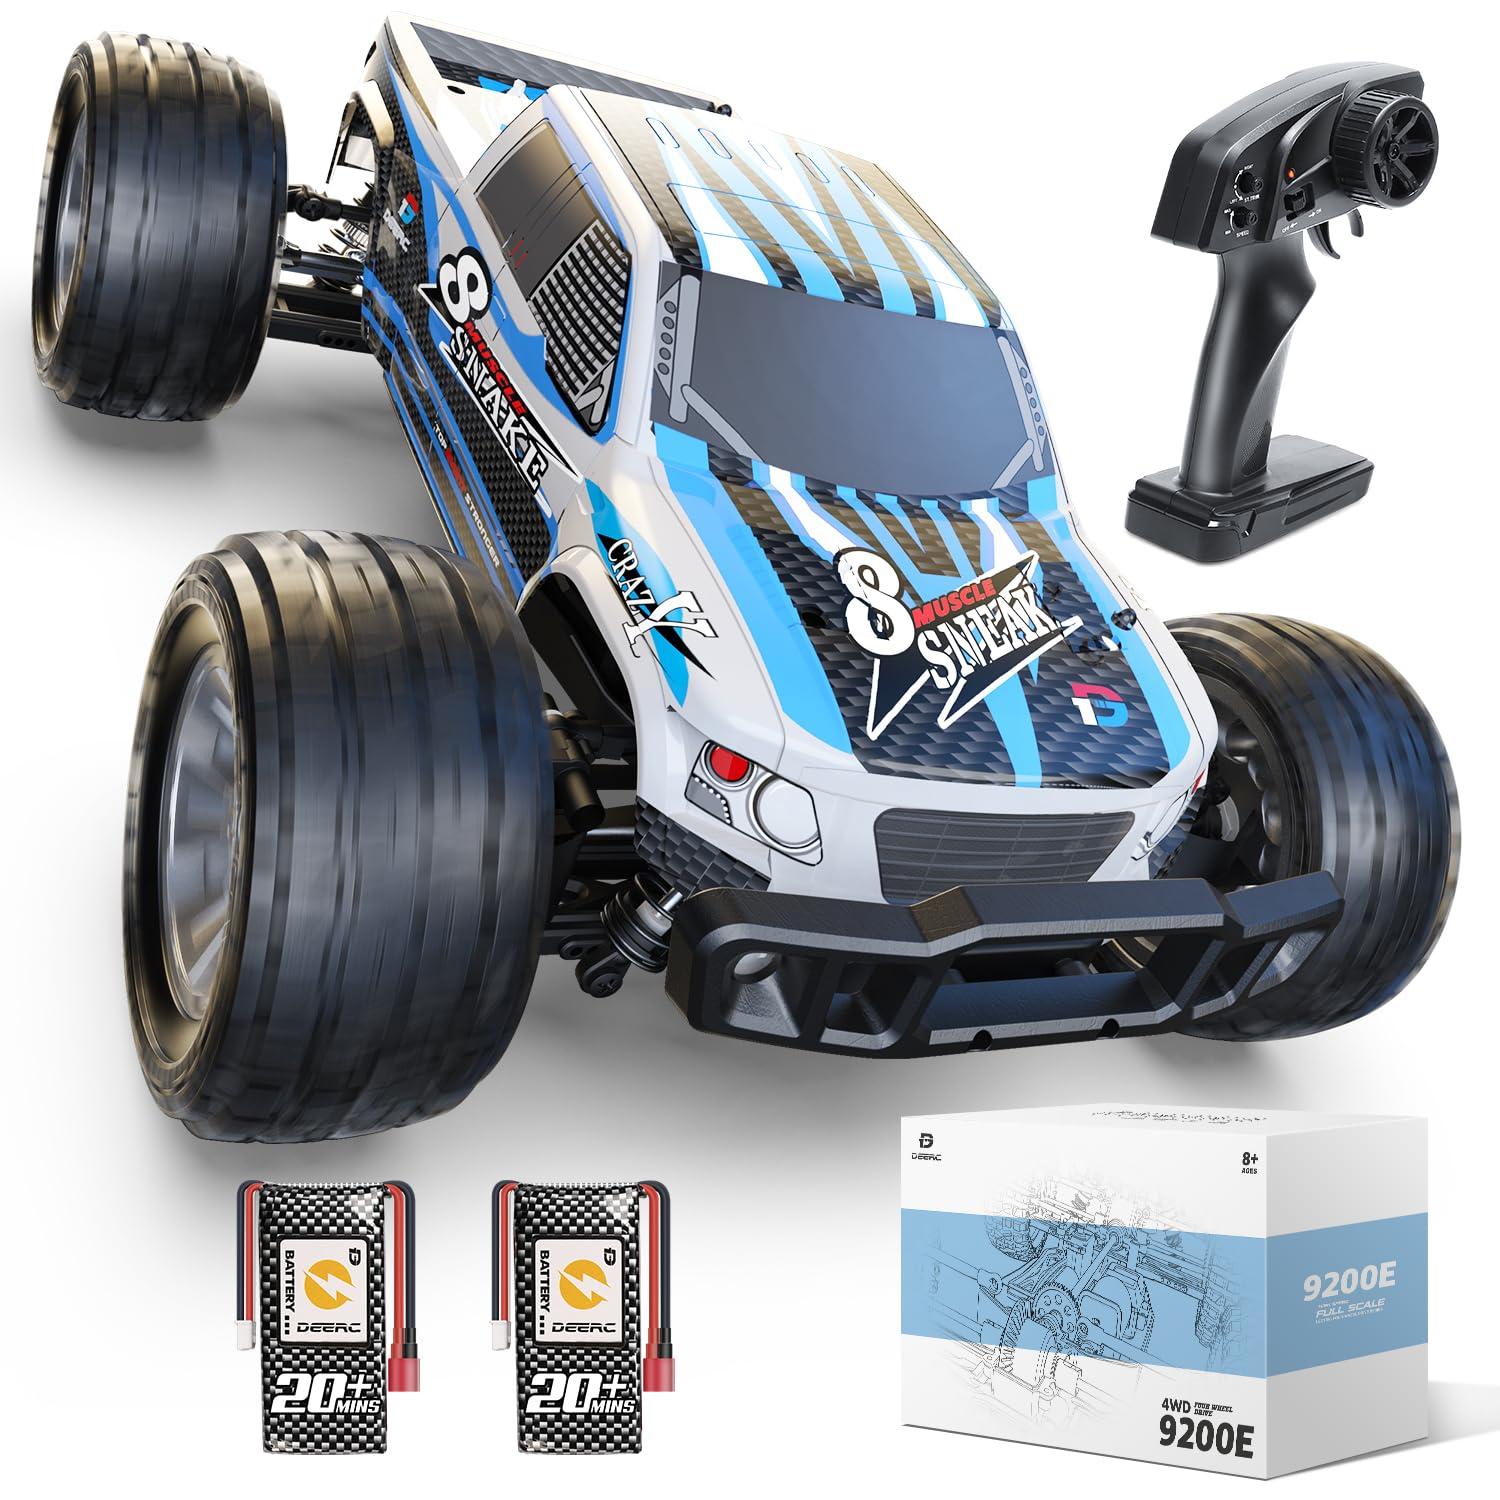 Super Fast Rc Cars Under $100: When purchasing RC cars for less than $100, consider these factors